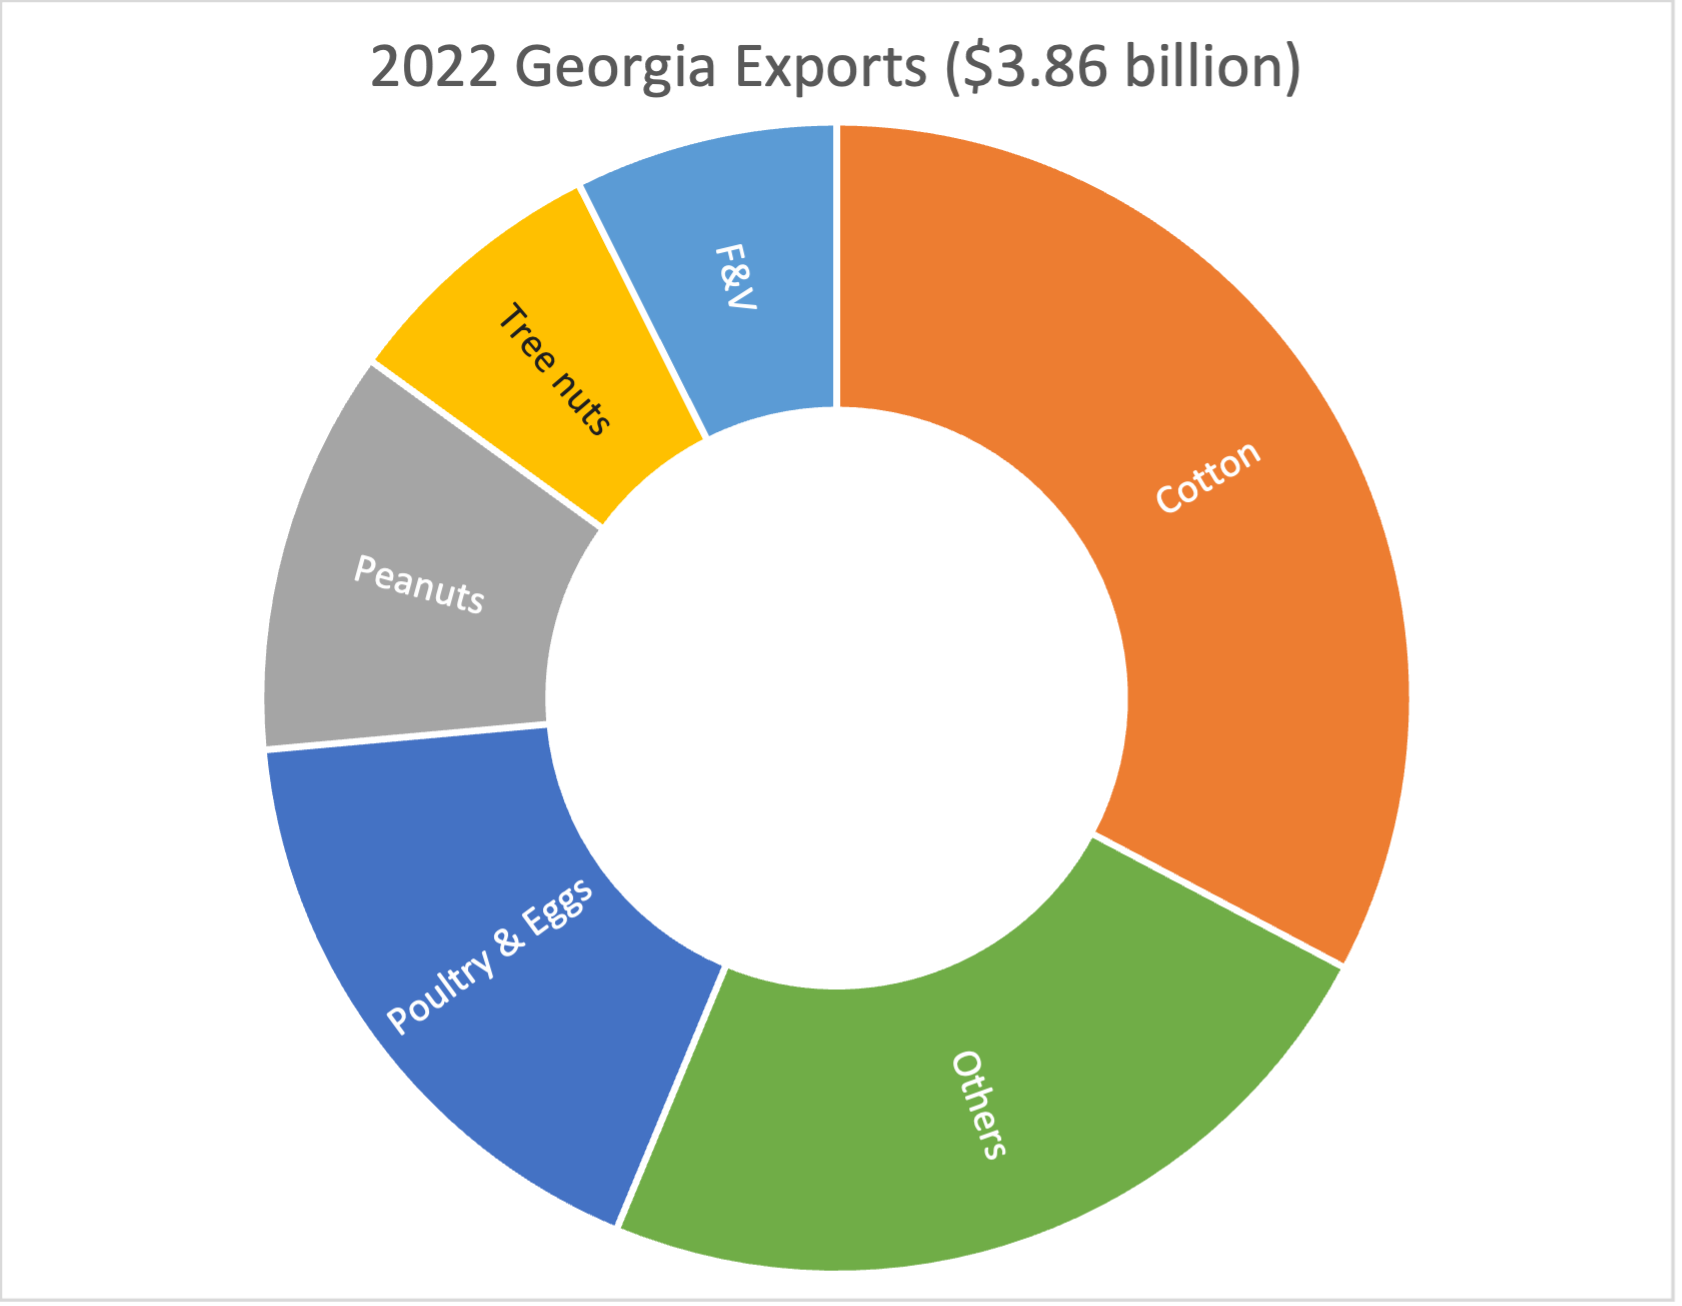 Georgia agricultural exports are comprised primarily of cotton (about 30-35% of the total), poultry and eggs (about 15-20% of total), and peanuts, tree nuts, and fruit and vegetables. These last three categories make up about 25% of the total. The remainder is listed as other exports.